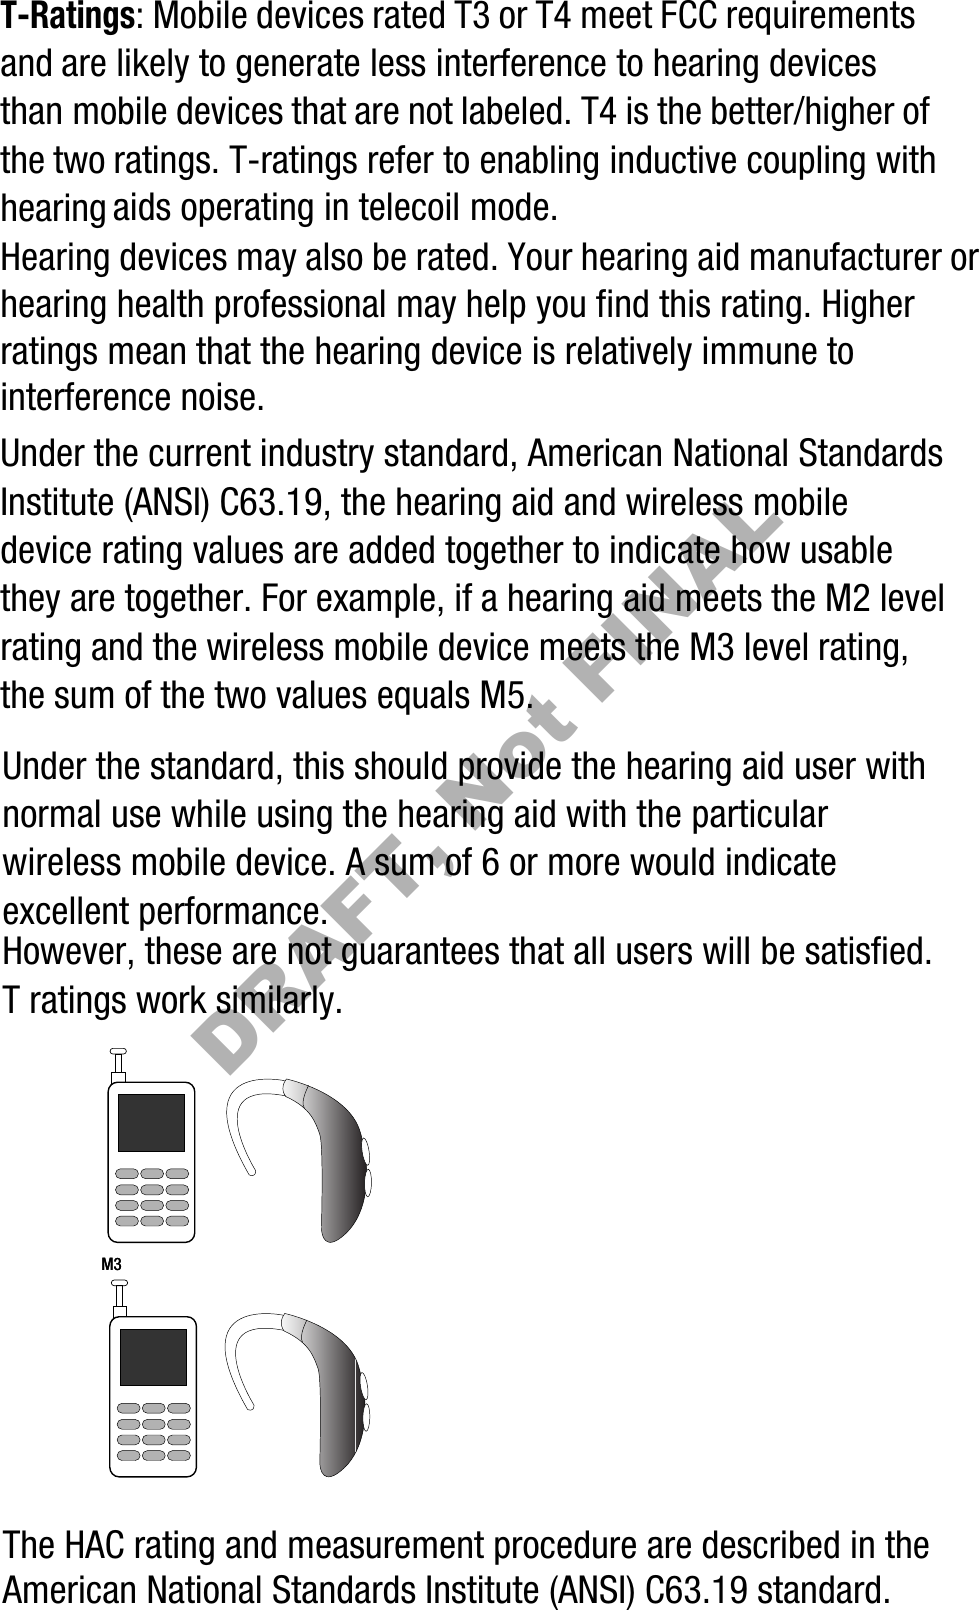 T-Ratings: Mobile devices rated T3 or T4 meet FCC requirements and are likely to generate less interference to hearing devices than mobile devices that are not labeled. T4 is the better/higher of the two ratings. T-ratings refer to enabling inductive coupling with hearing aids operating in telecoil mode.Hearing devices may also be rated. Your hearing aid manufacturer or hearing health professional may help you find this rating. Higher ratings mean that the hearing device is relatively immune to interference noise. Under the current industry standard, American National Standards Institute (ANSI) C63.19, the hearing aid and wireless mobile device rating values are added together to indicate how usable they are together. For example, if a hearing aid meets the M2 level rating and the wireless mobile device meets the M3 level rating, the sum of the two values equals M5. Under the standard, this should provide the hearing aid user with normal use while using the hearing aid with the particular wireless mobile device. A sum of 6 or more would indicate excellent performance.  However, these are not guarantees that all users will be satisfied. T ratings work similarly.The HAC rating and measurement procedure are described in the American National Standards Institute (ANSI) C63.19 standard.    M3       M3        DRAFT, Not FINAL